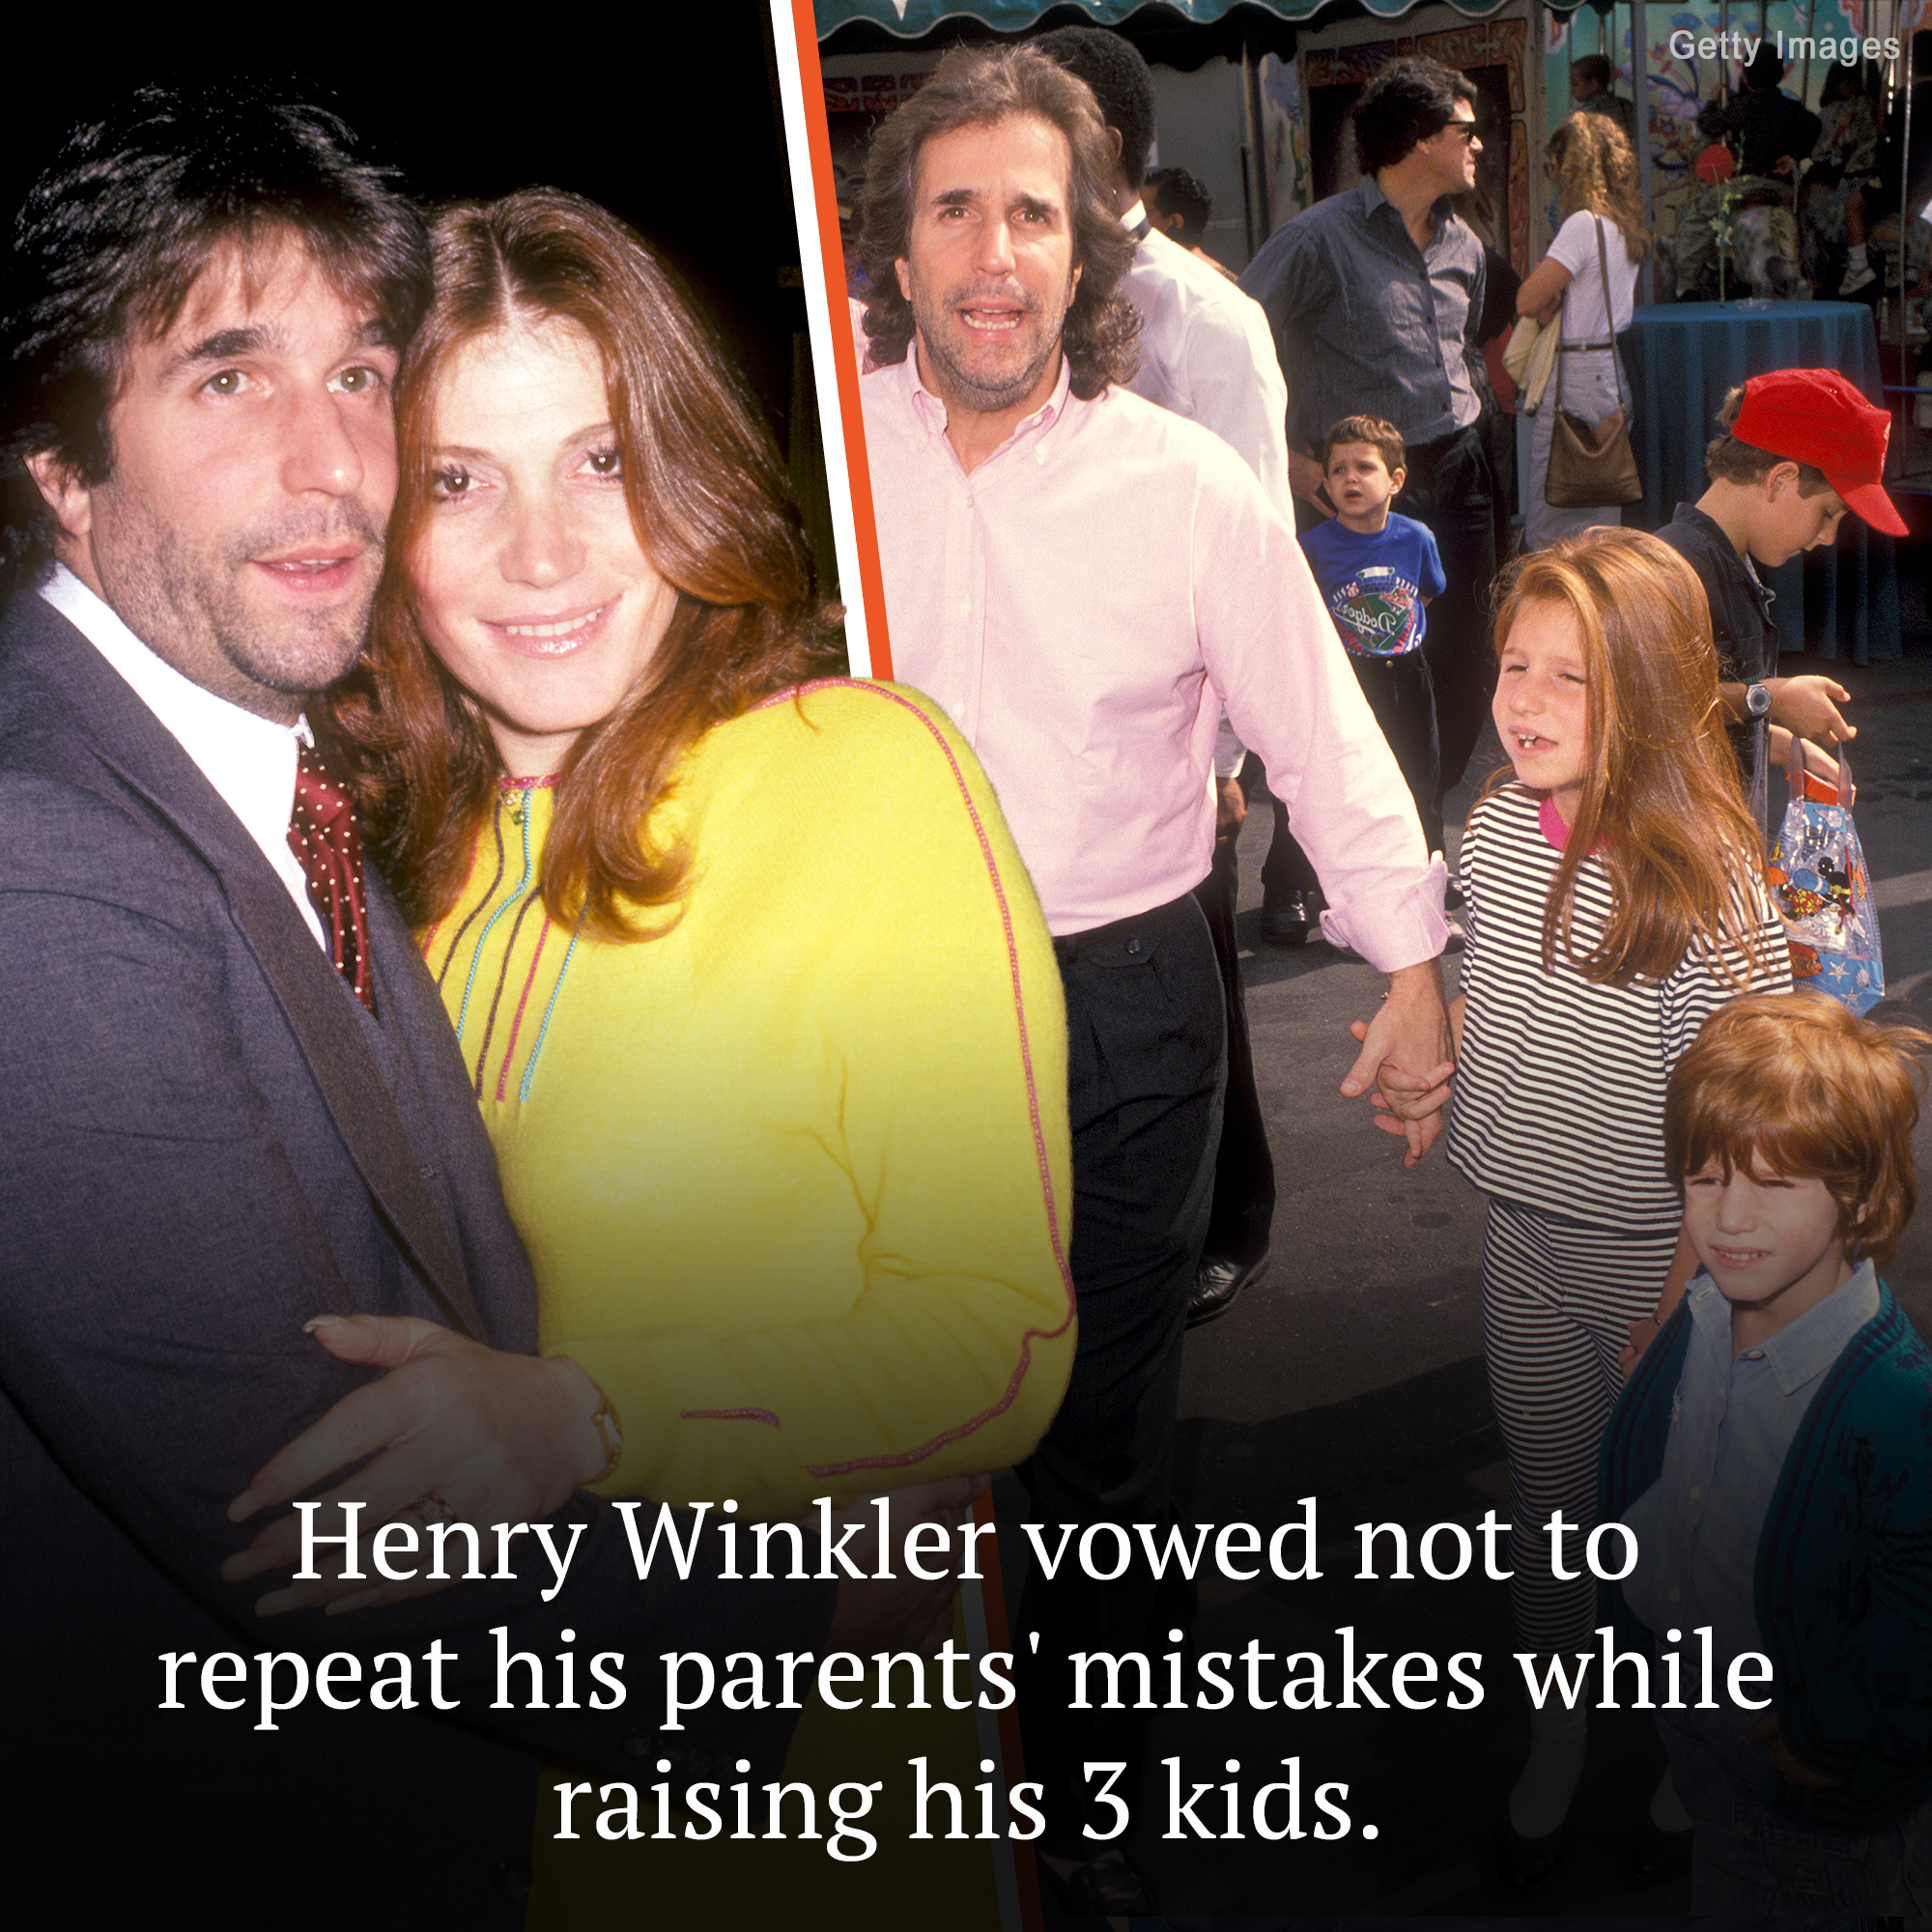 Henry Winkler, a.k.a Arthur “Fonzie” Fonzarelli in “Happy Days,” was raised with a “high level of low self-esteem.” In his childhood, he never felt heard by his parents, who called him a “dumb dog.